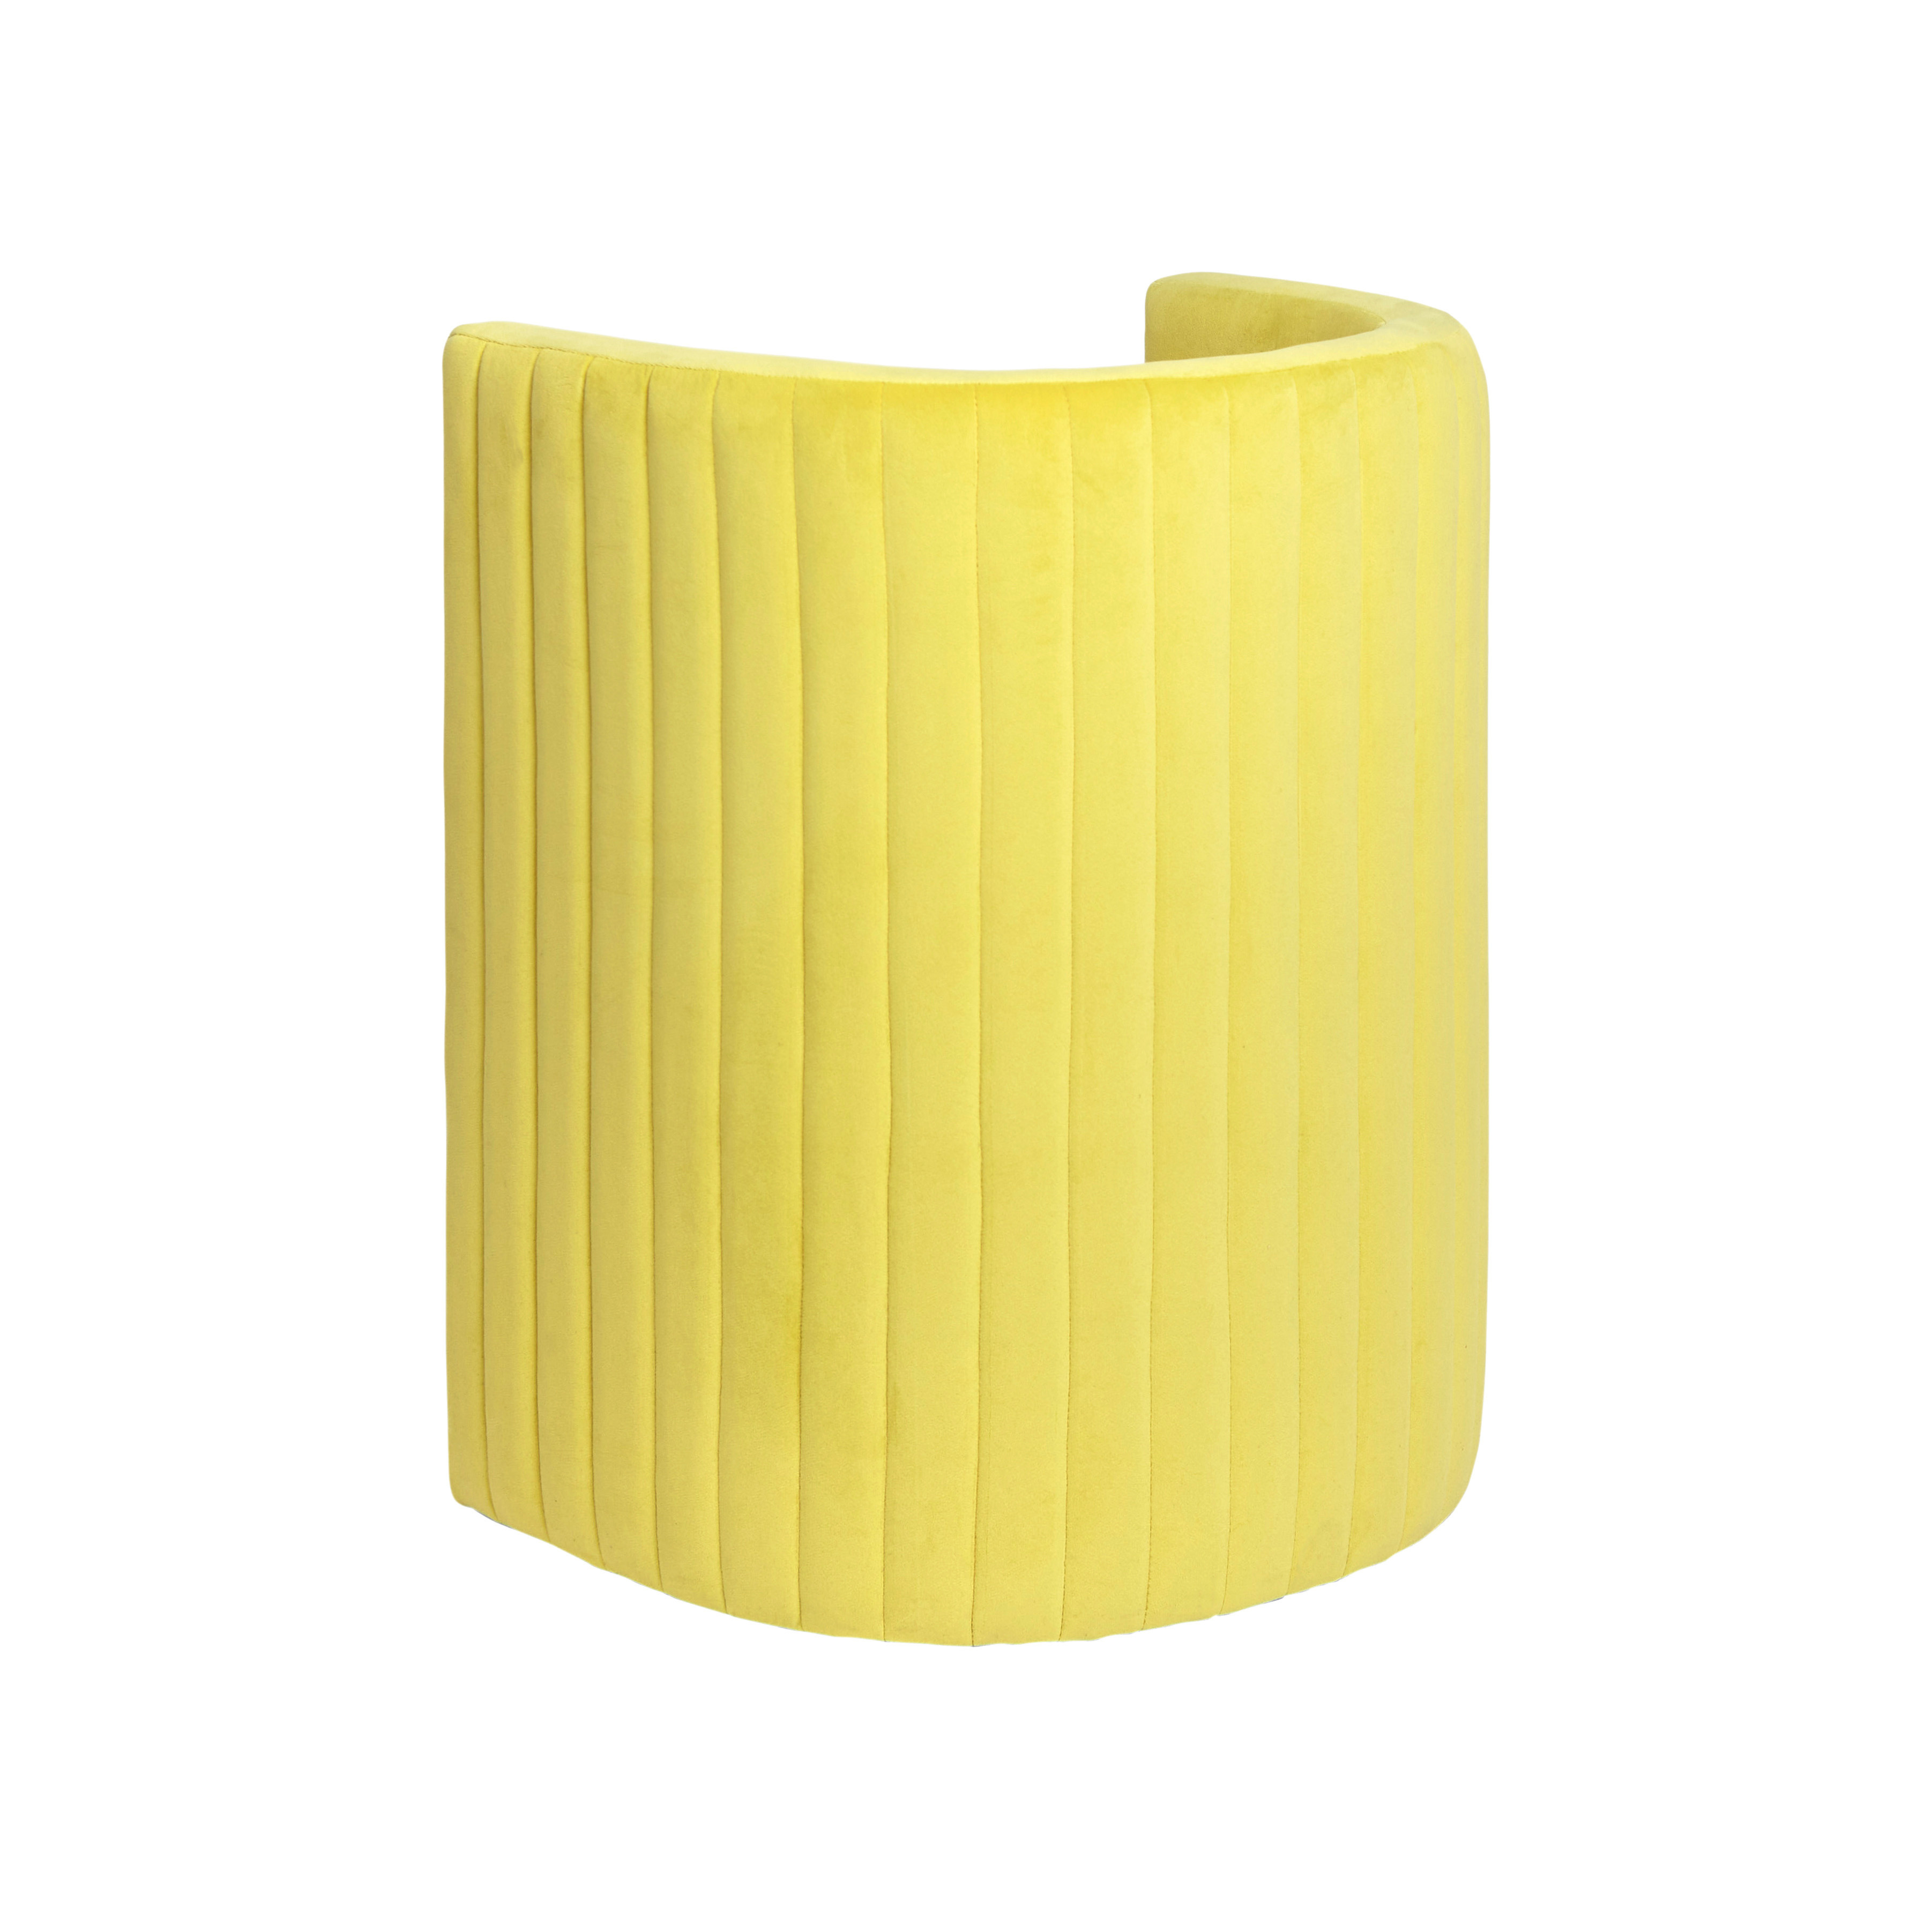 Round armchair and stool set, Yellow, large image number 1